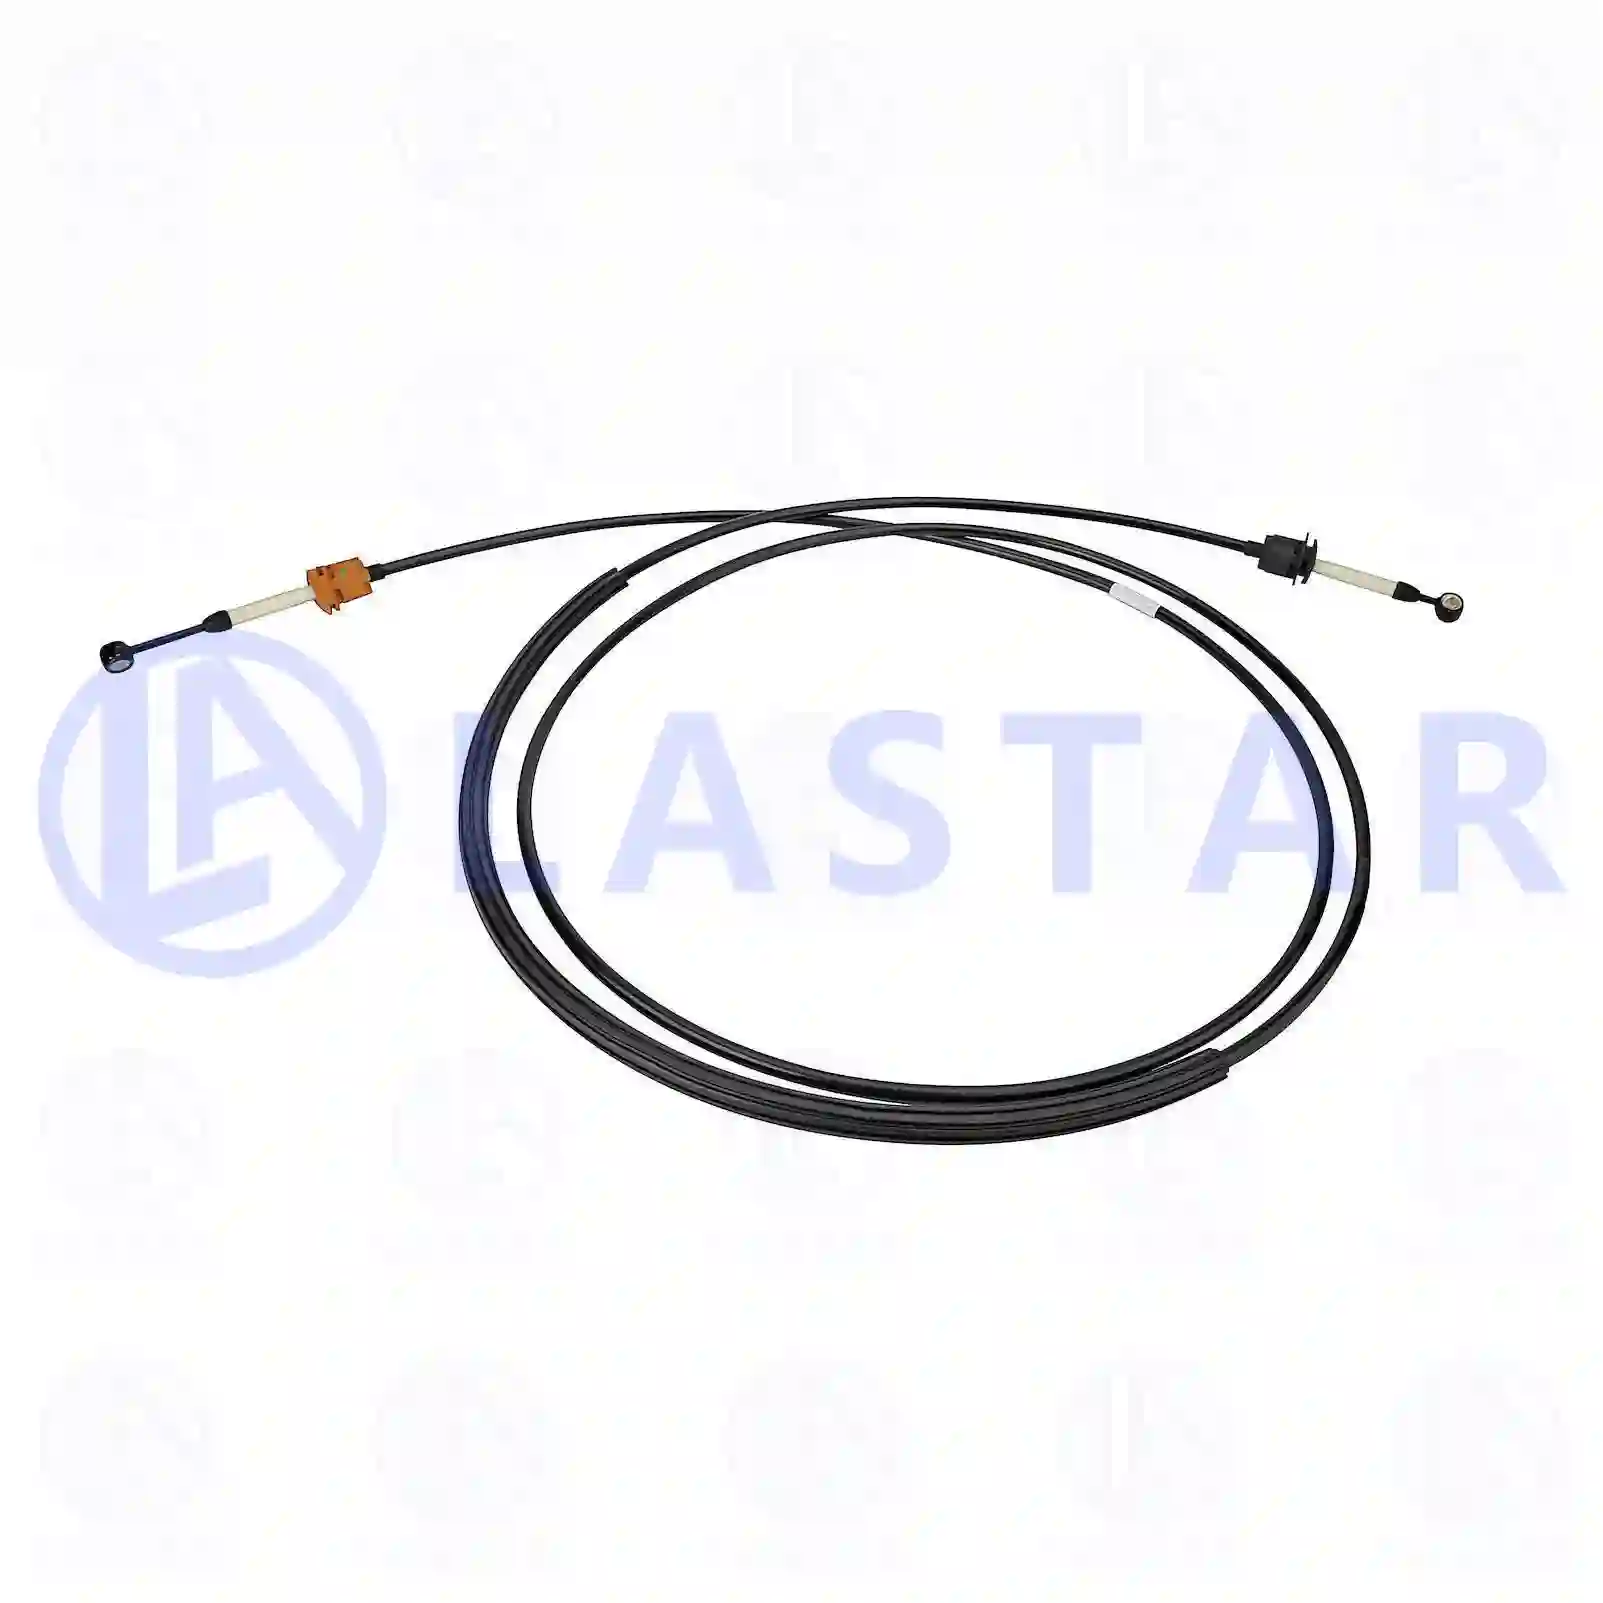 Control cable, switching, 77732438, 20545990, 20700990, 21002890, 21343590, 21789720, ZG21346-0008 ||  77732438 Lastar Spare Part | Truck Spare Parts, Auotomotive Spare Parts Control cable, switching, 77732438, 20545990, 20700990, 21002890, 21343590, 21789720, ZG21346-0008 ||  77732438 Lastar Spare Part | Truck Spare Parts, Auotomotive Spare Parts